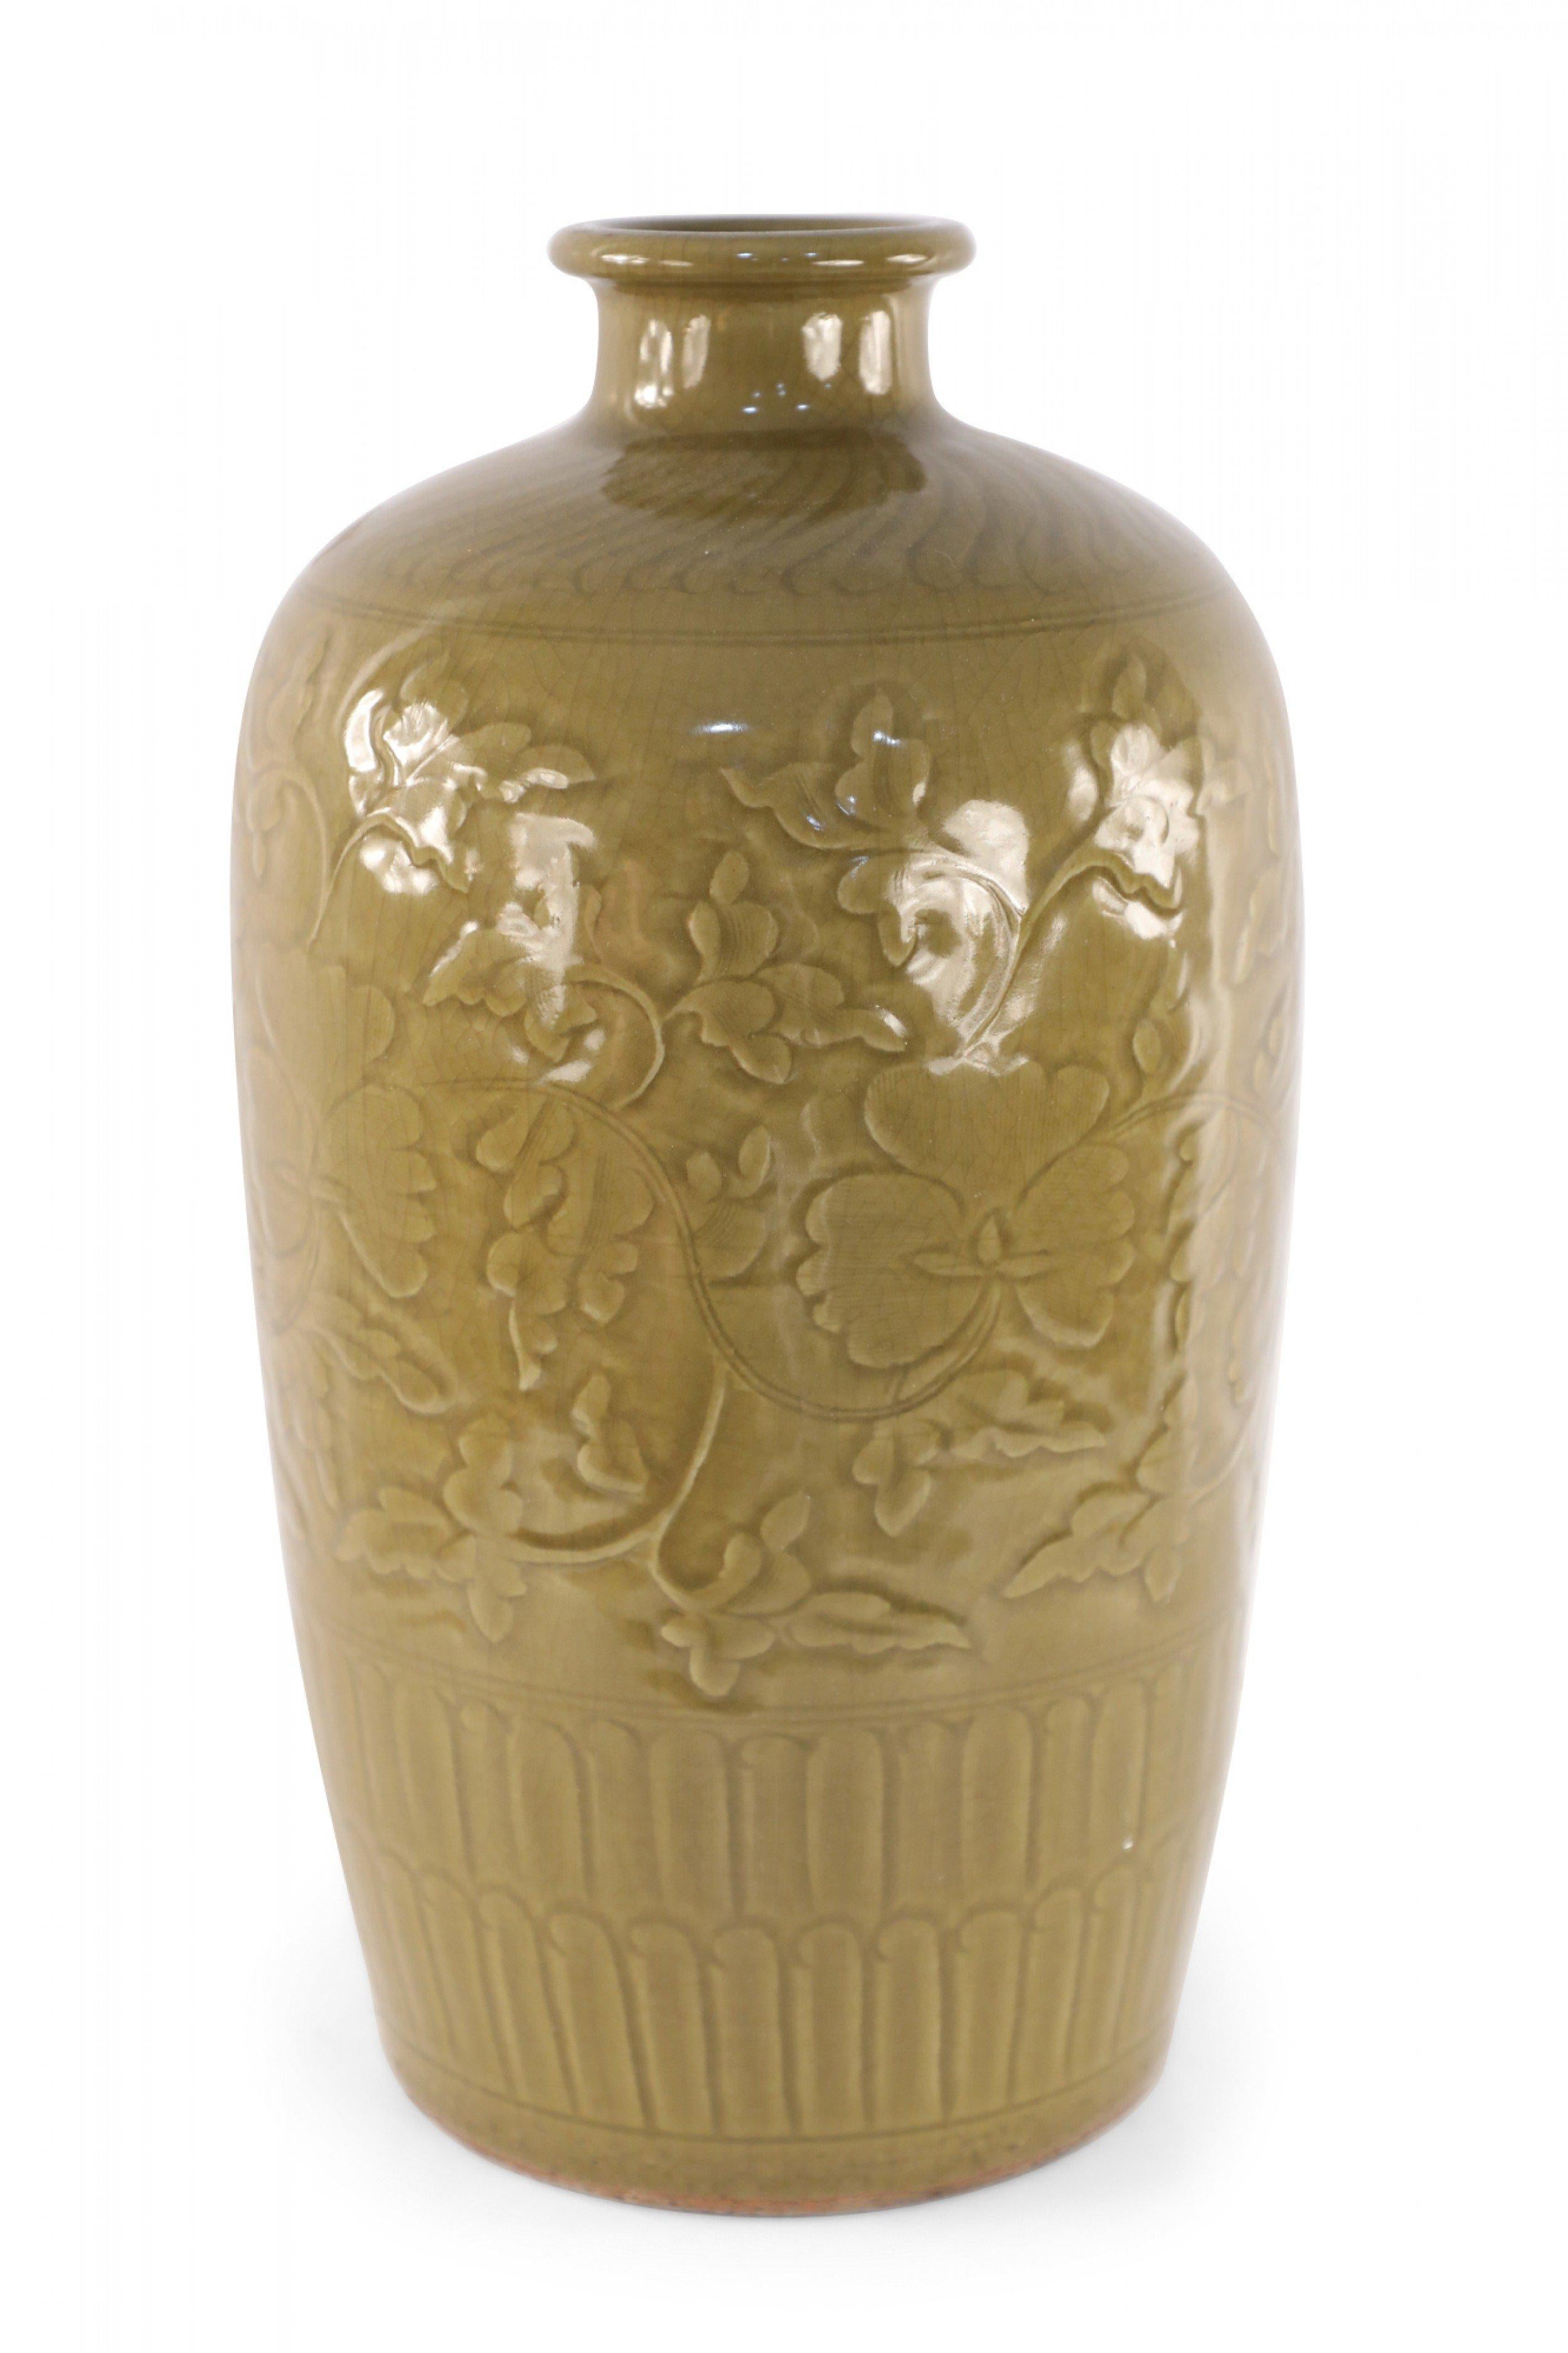 Chinese, mustard-colored porcelain Meiping form vase carved in raised, tonal florals, with patterned bands around the top and base.